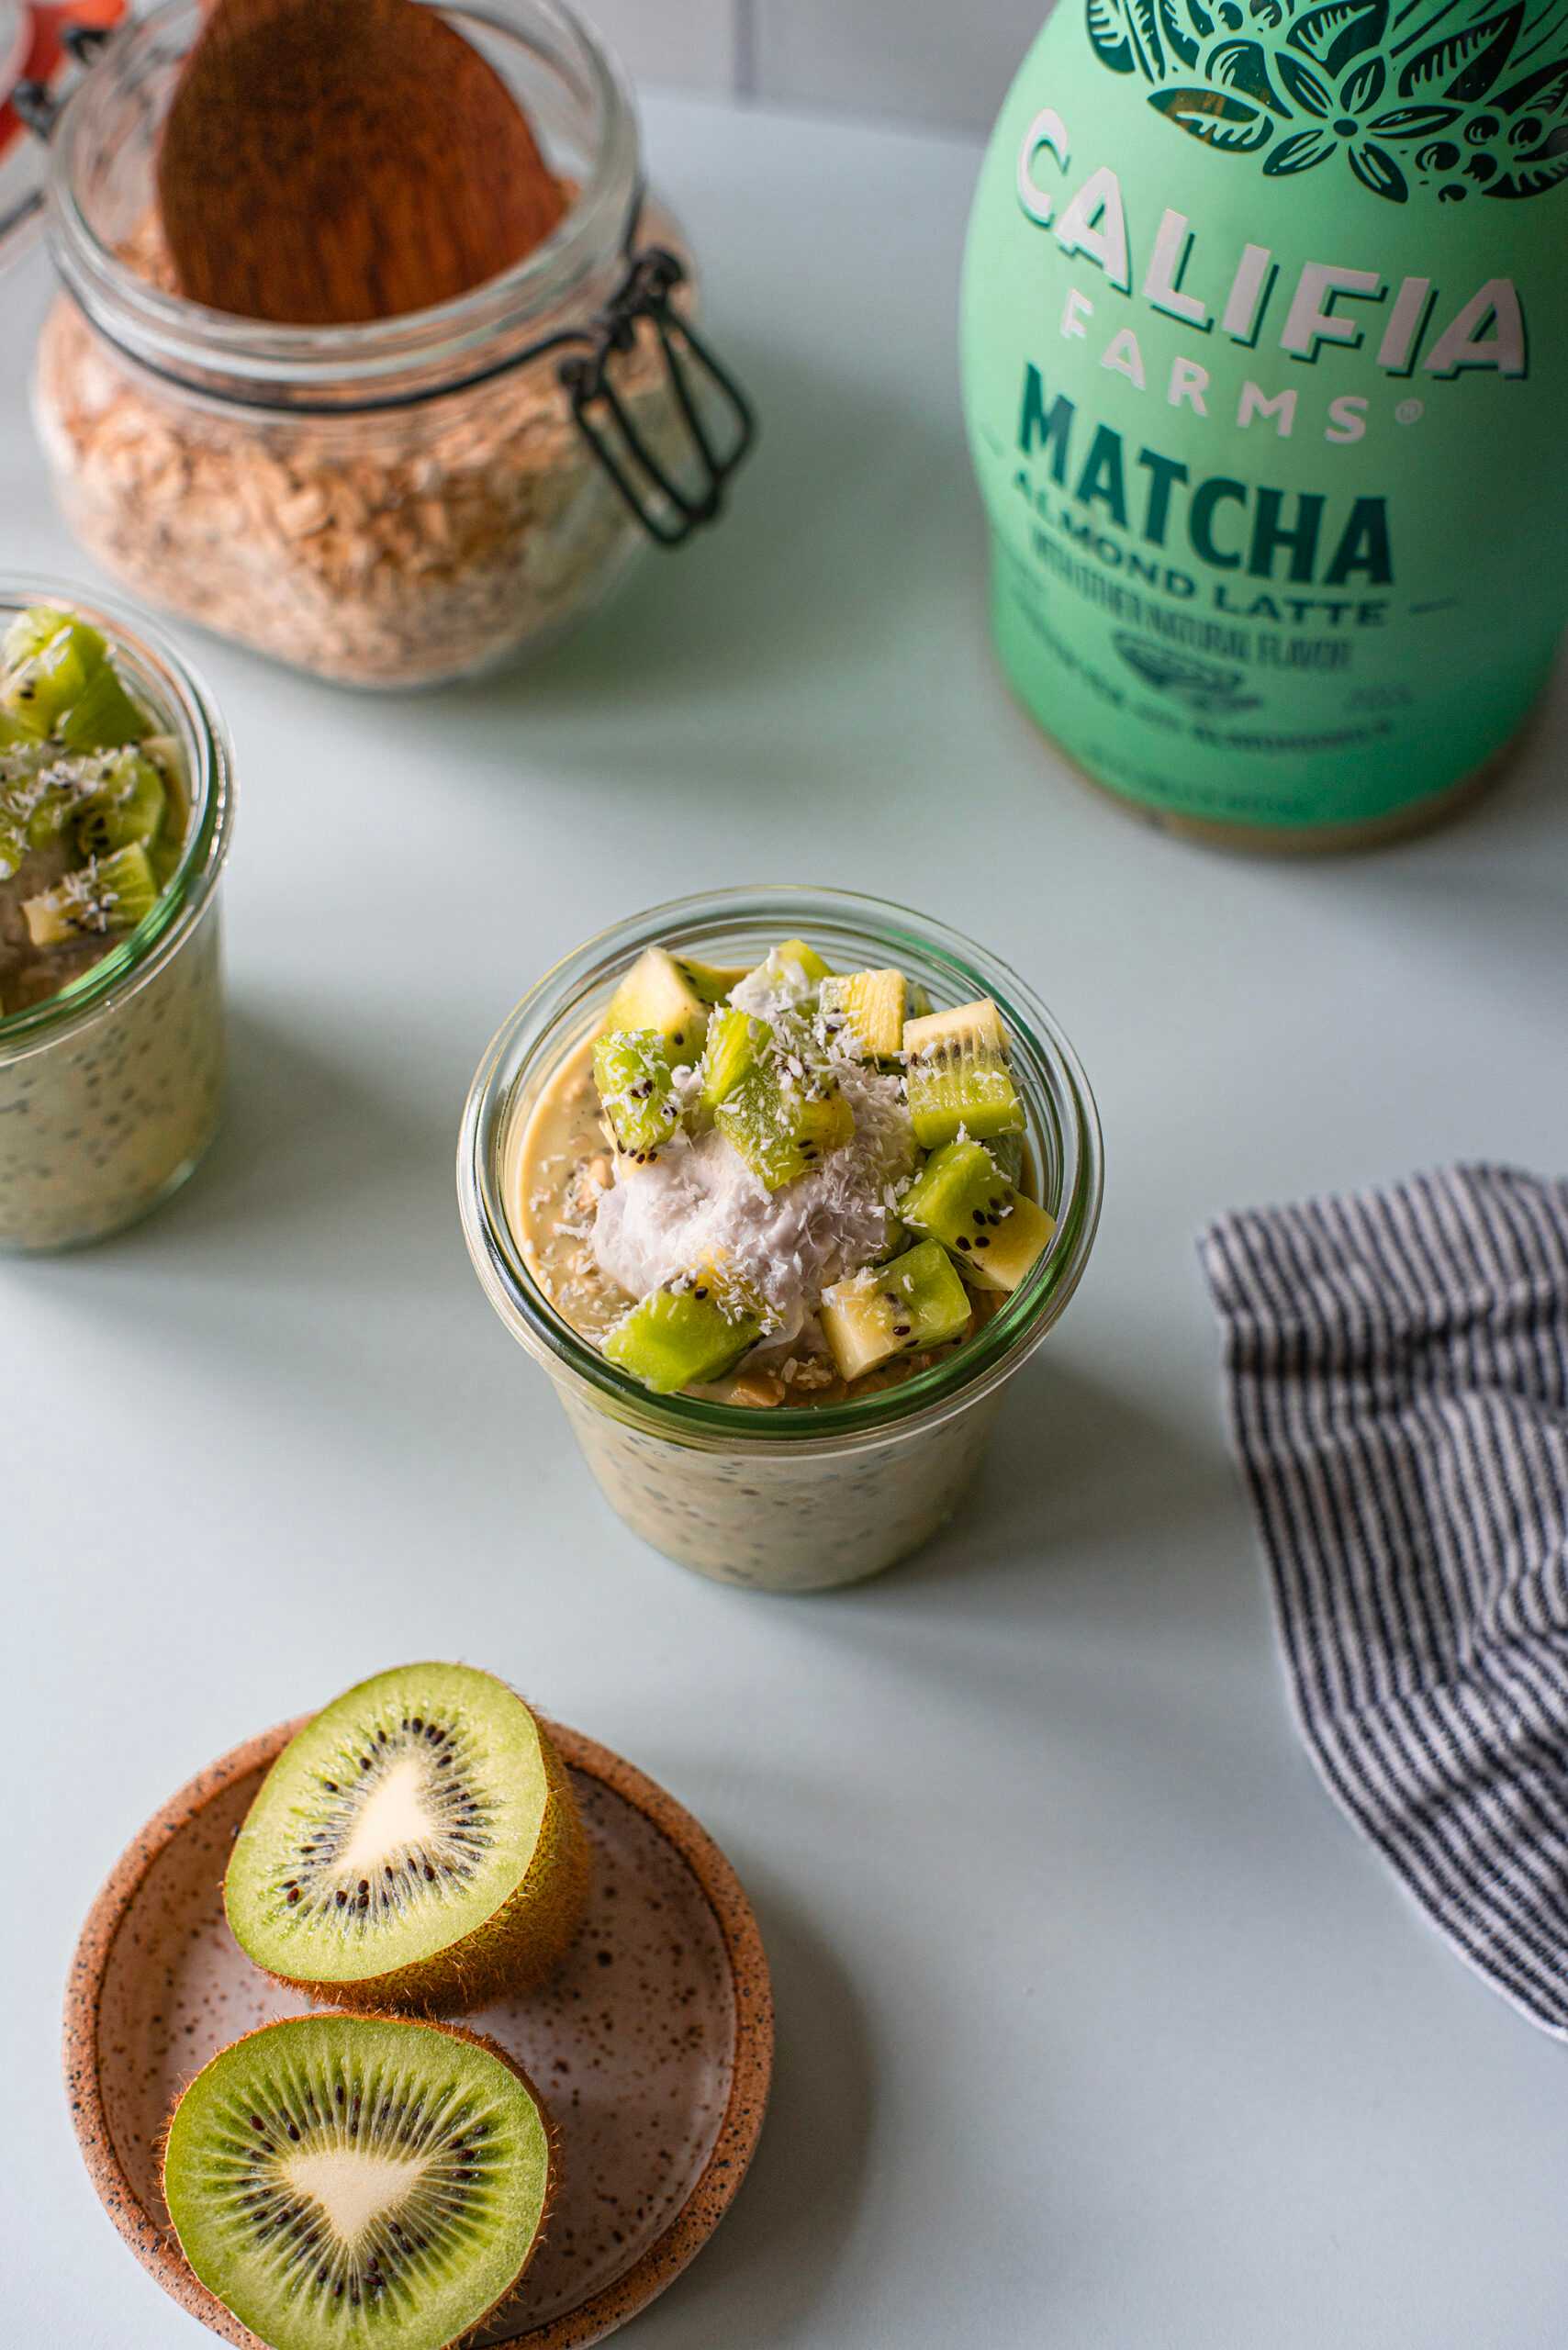 A jar of Matcha Overnight Oats sits at the center of the image, with a bowl of kiwi fruit nearby and Califia Farms Matcha Latte in the back of the image